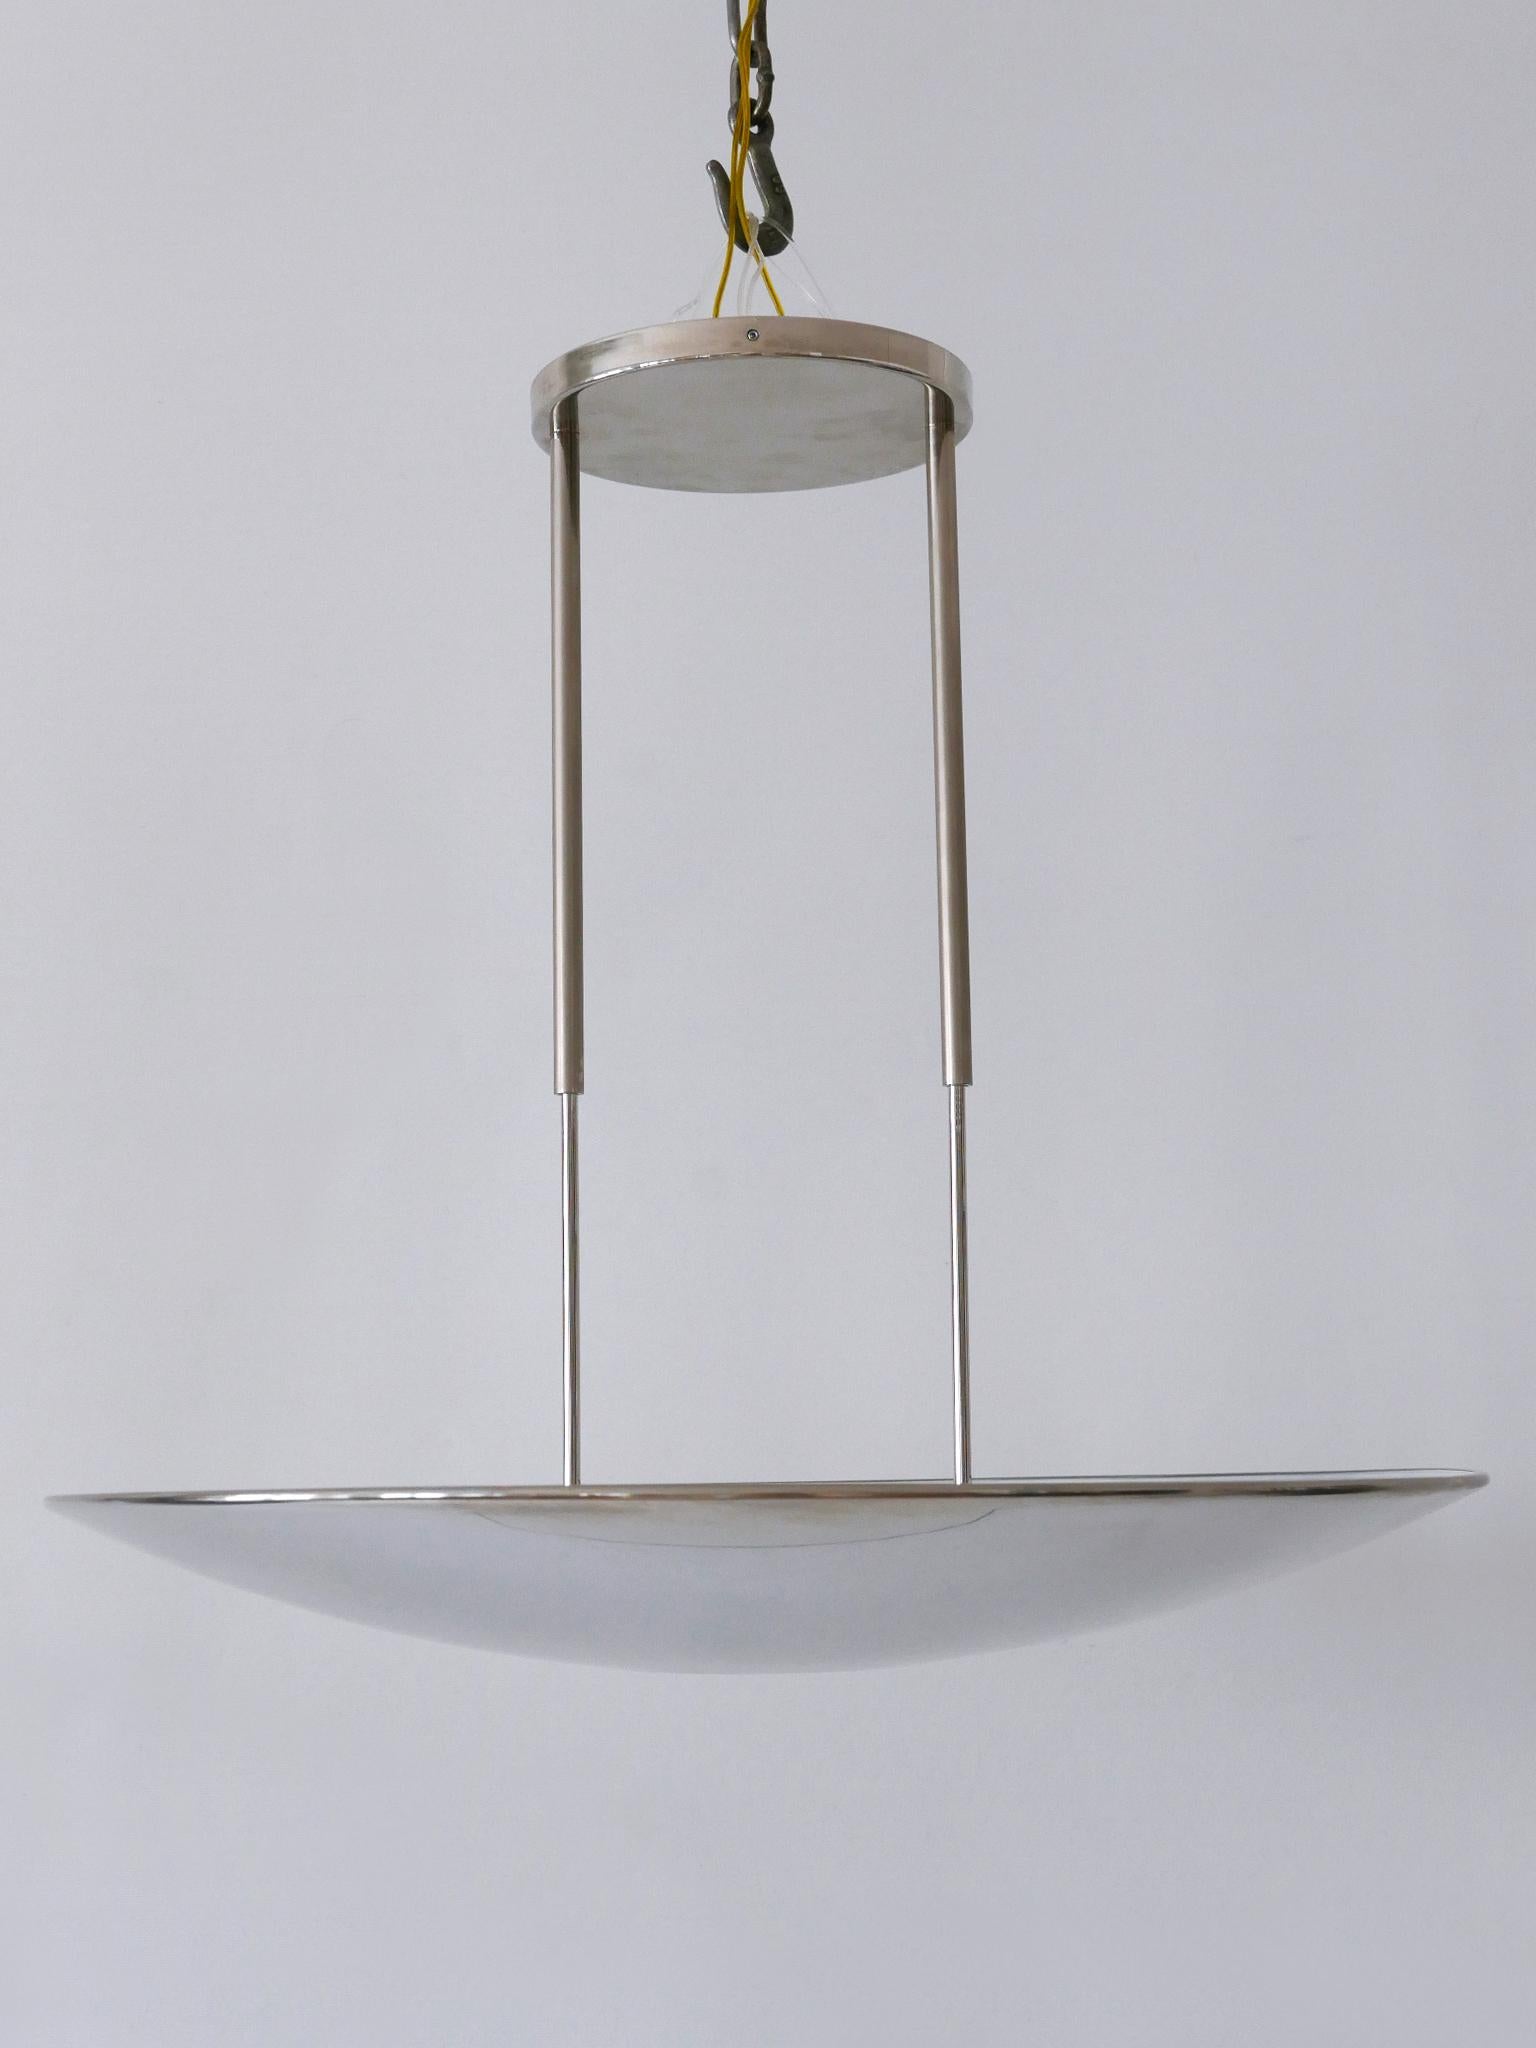 Modernist Brass Pendant Lamp or Ceiling Fixture by Florian Schulz Germany 1980s For Sale 5